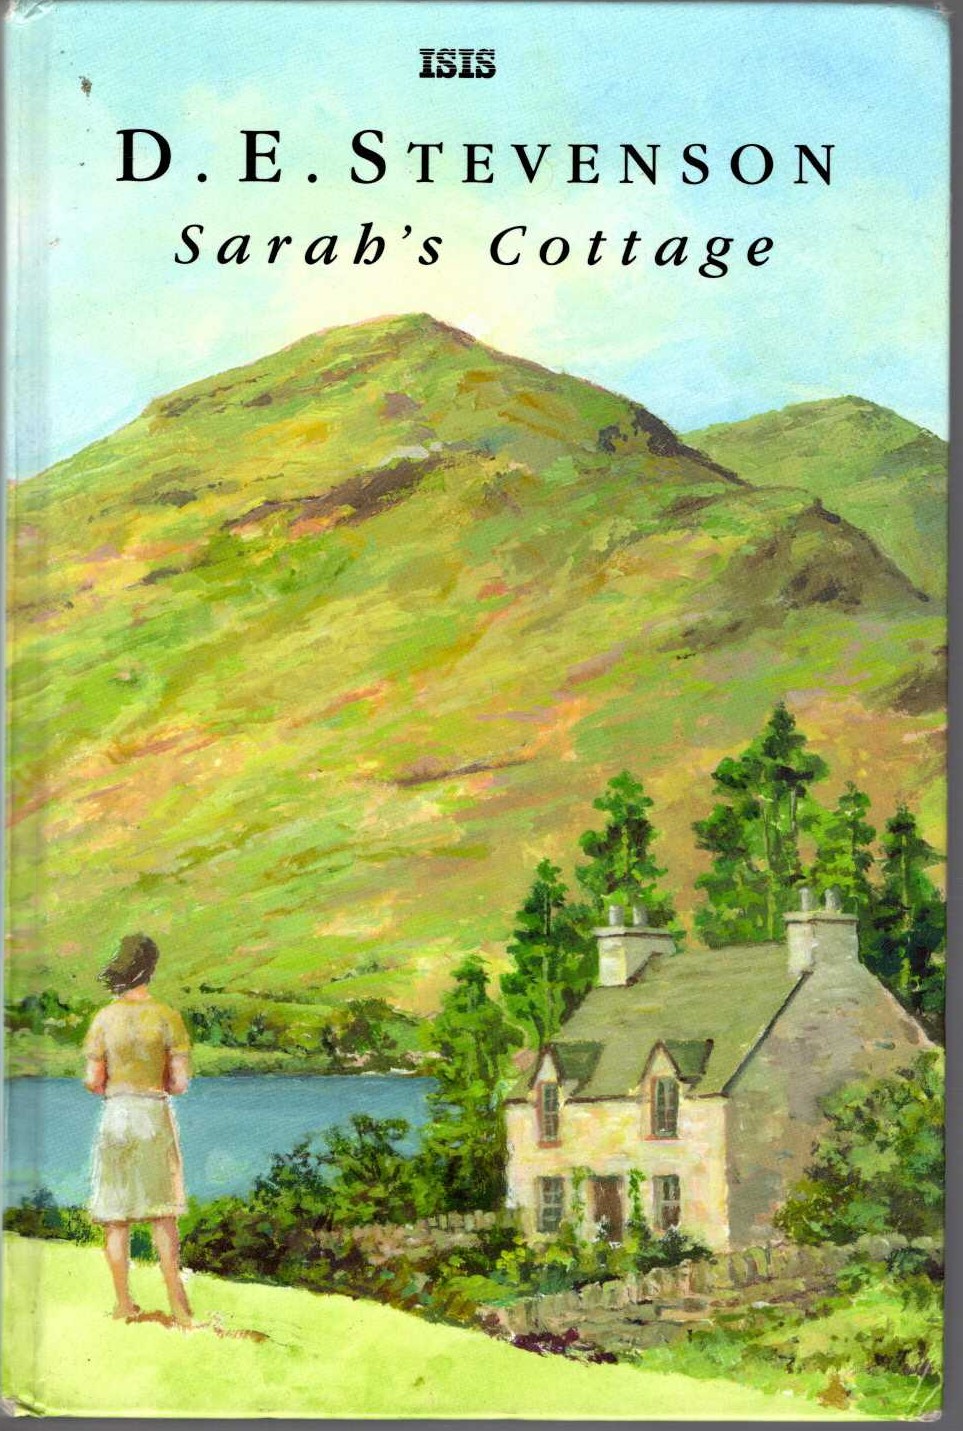 SARAH'S COTTAGE front book cover image